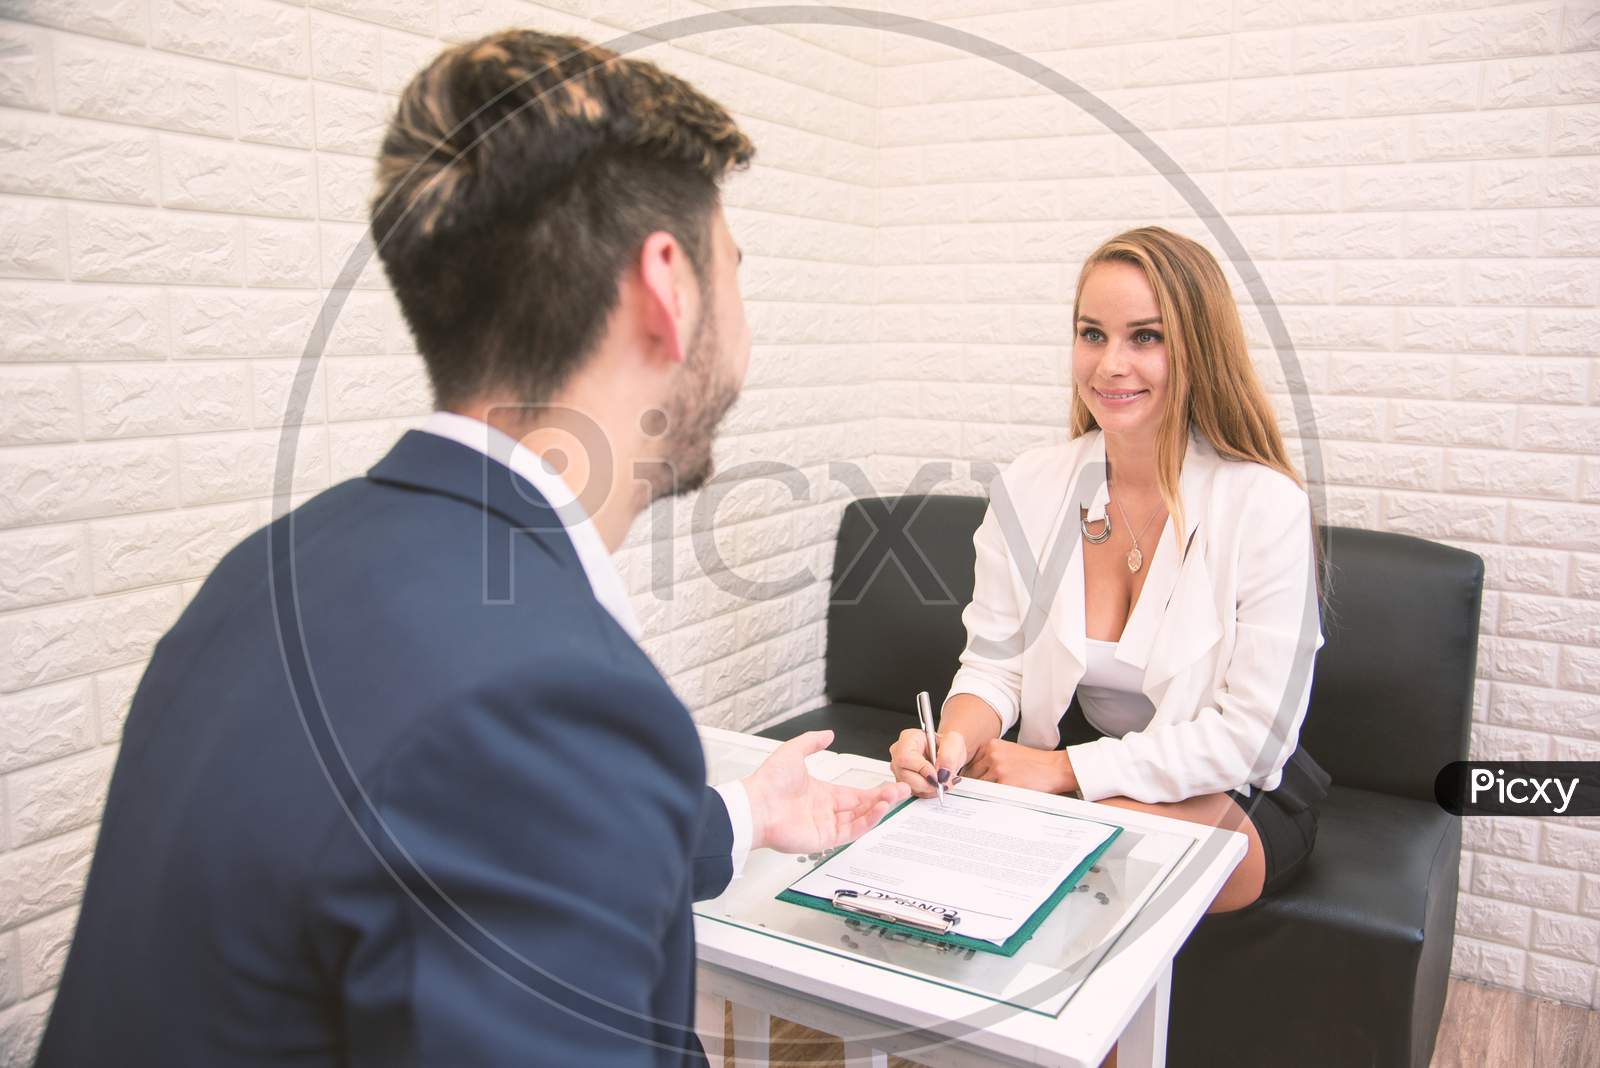 Business Employer Offering Work To New Employee Extend Agreement For Signing To Successful Applicant, Hiring New Staff Concept, Assignment, Job Placement, Terms Of Employment, Vacancy And Getting Job